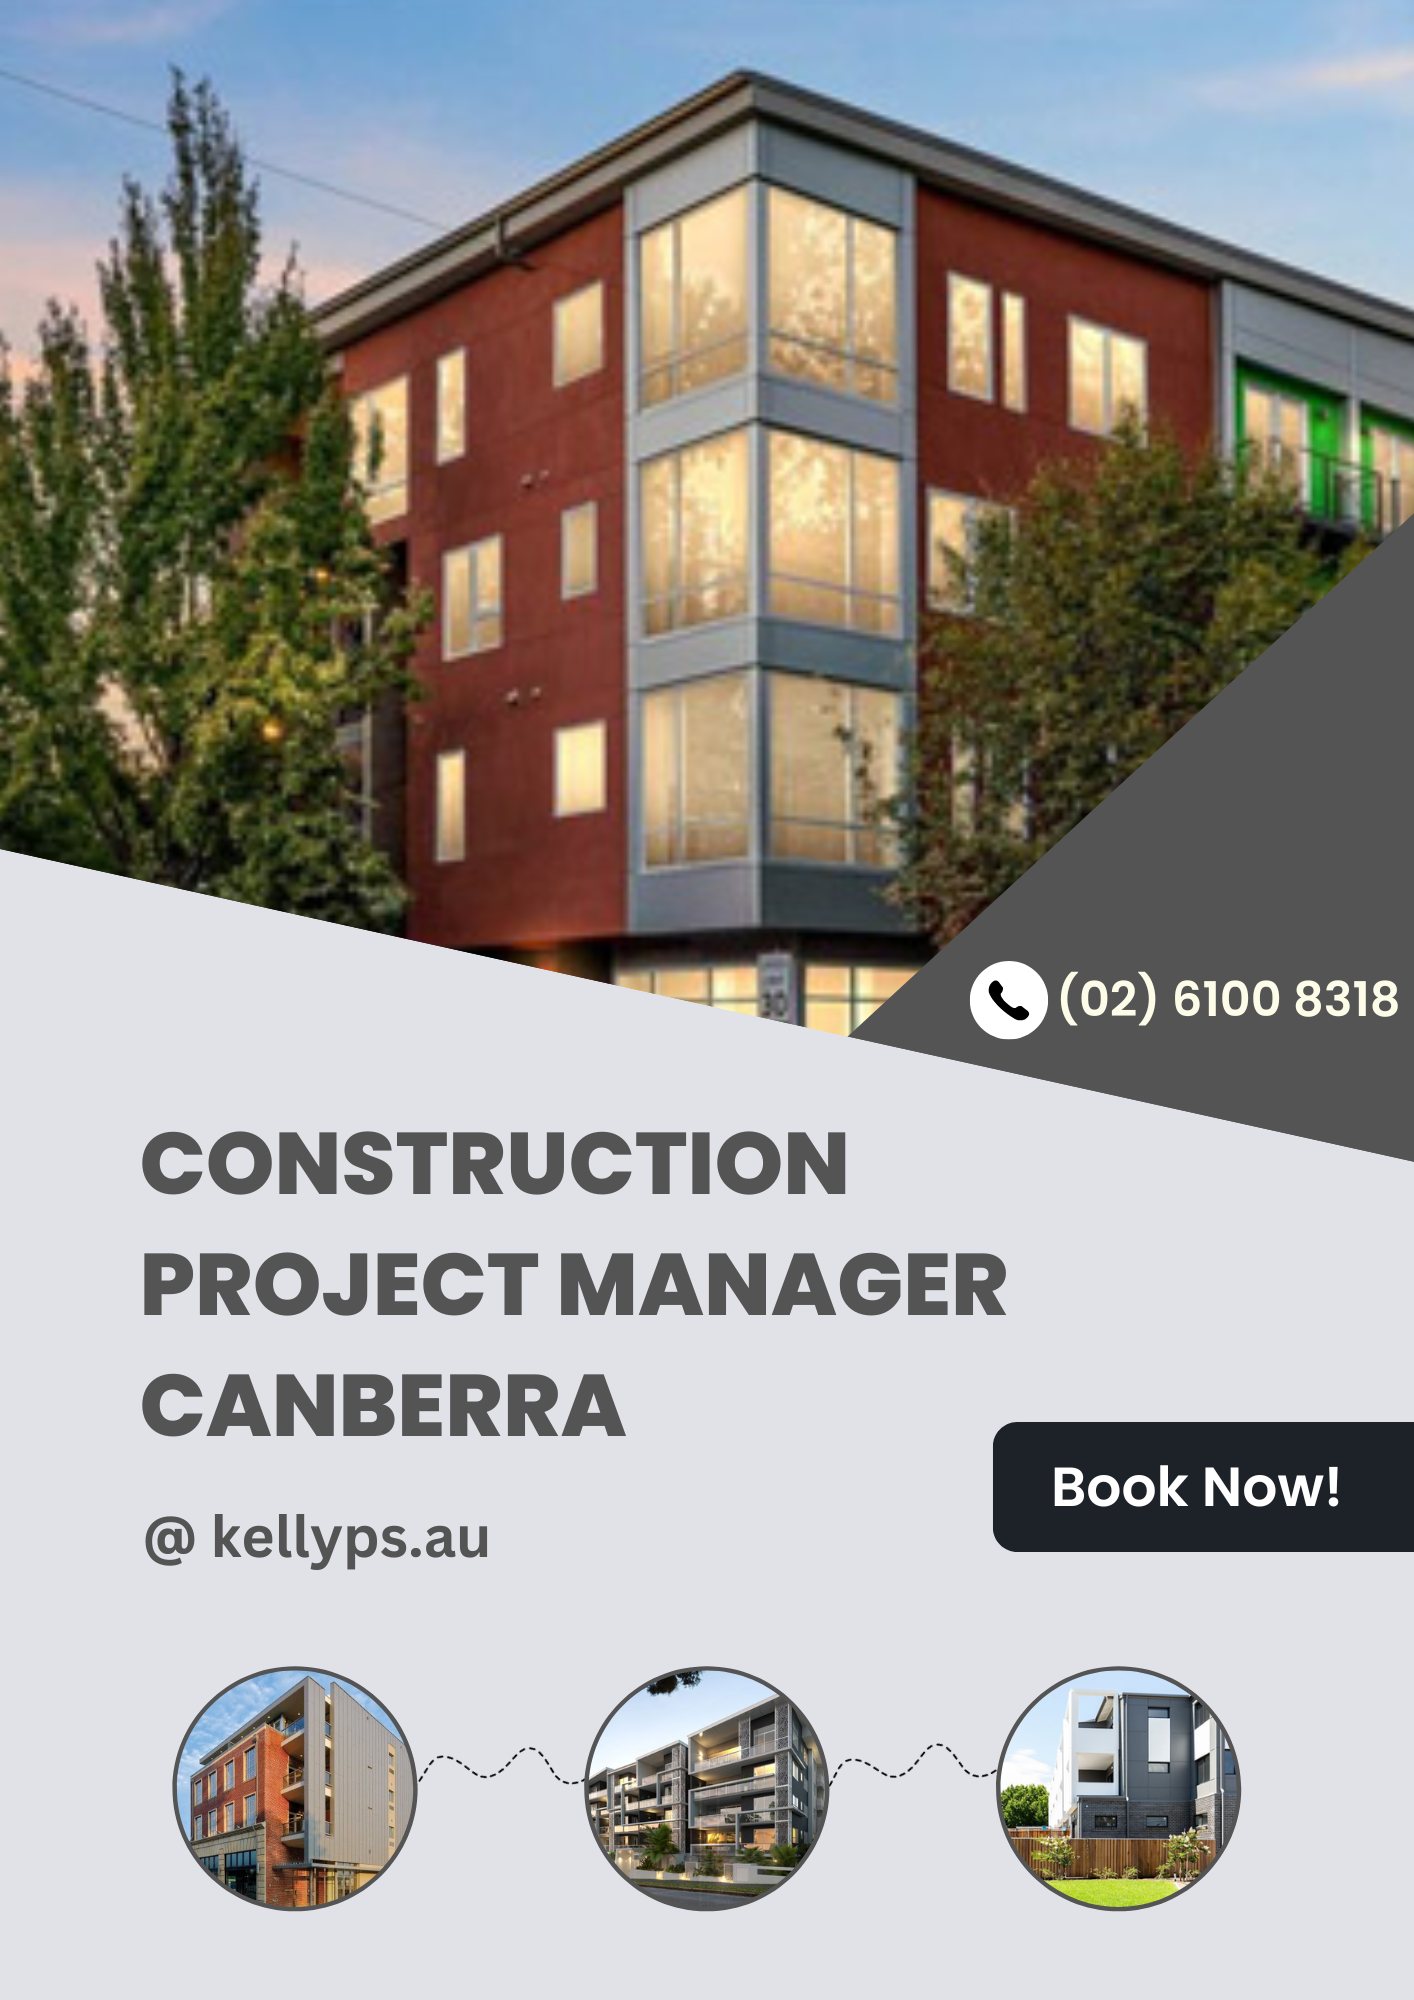 Construction Project Manager Canberra